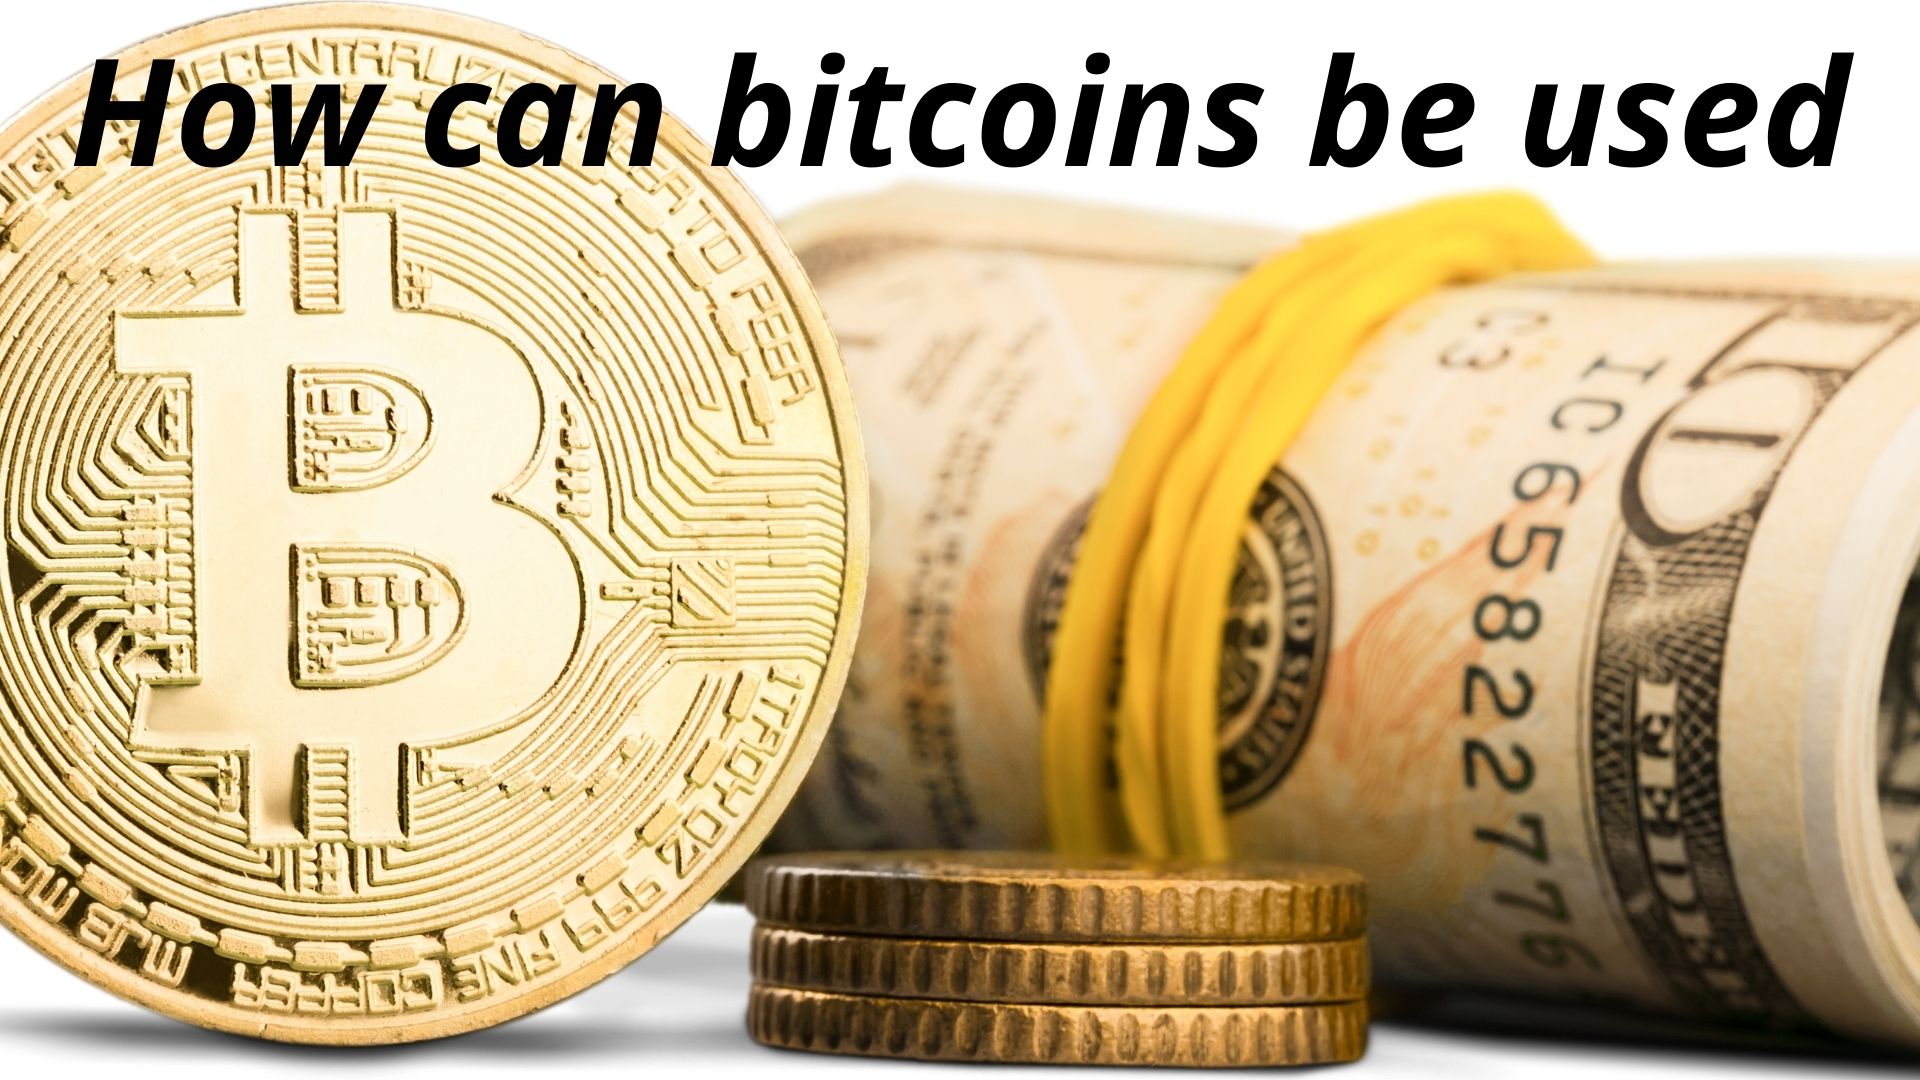 where can bitcoins be used